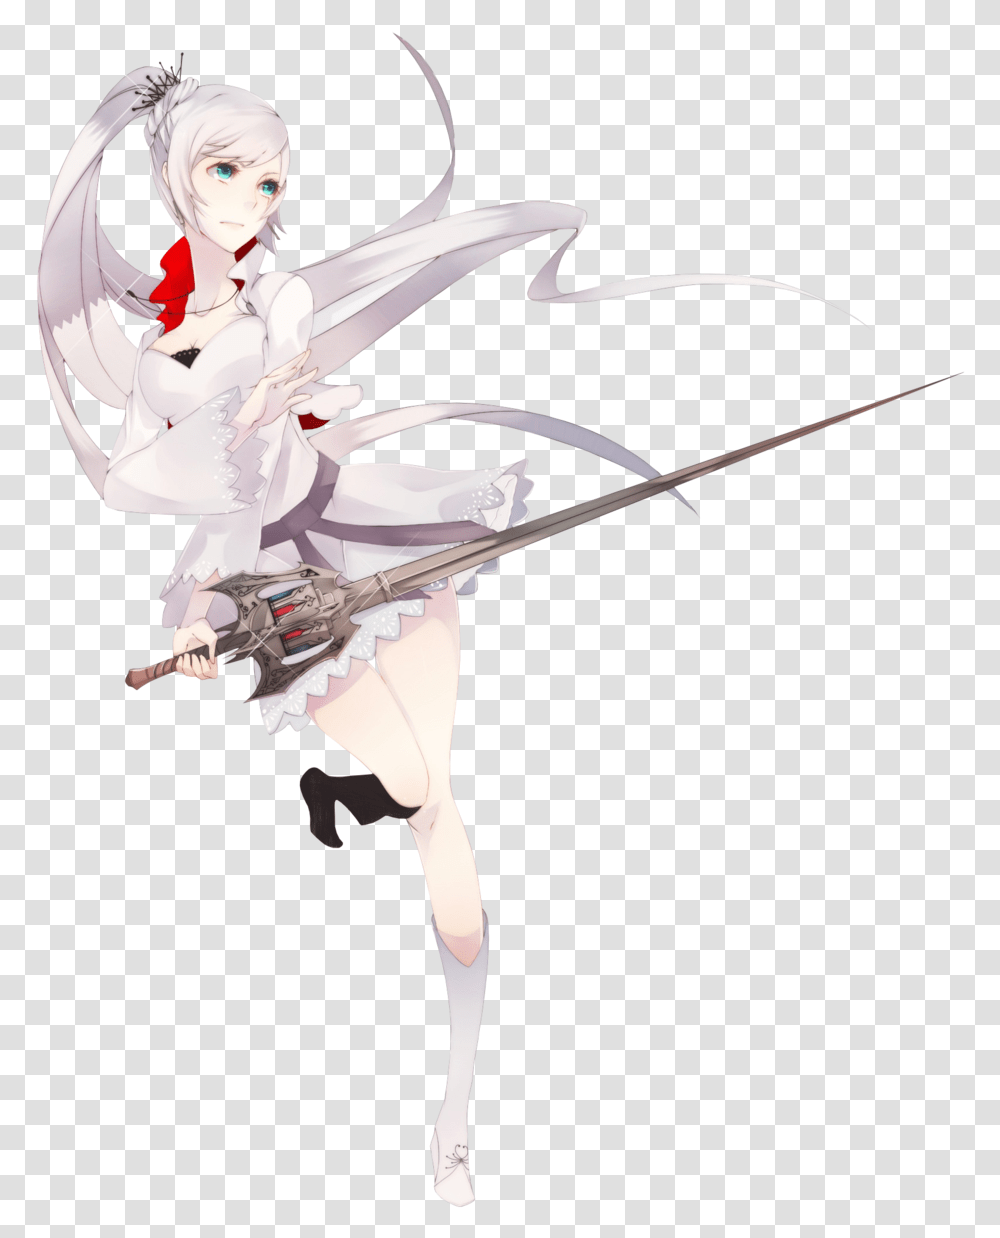 Download Weiss Render White Hair Girl Anime Sword Full Badass Anime Girl White Hair, Person, Human, Bow, Dance Transparent Png